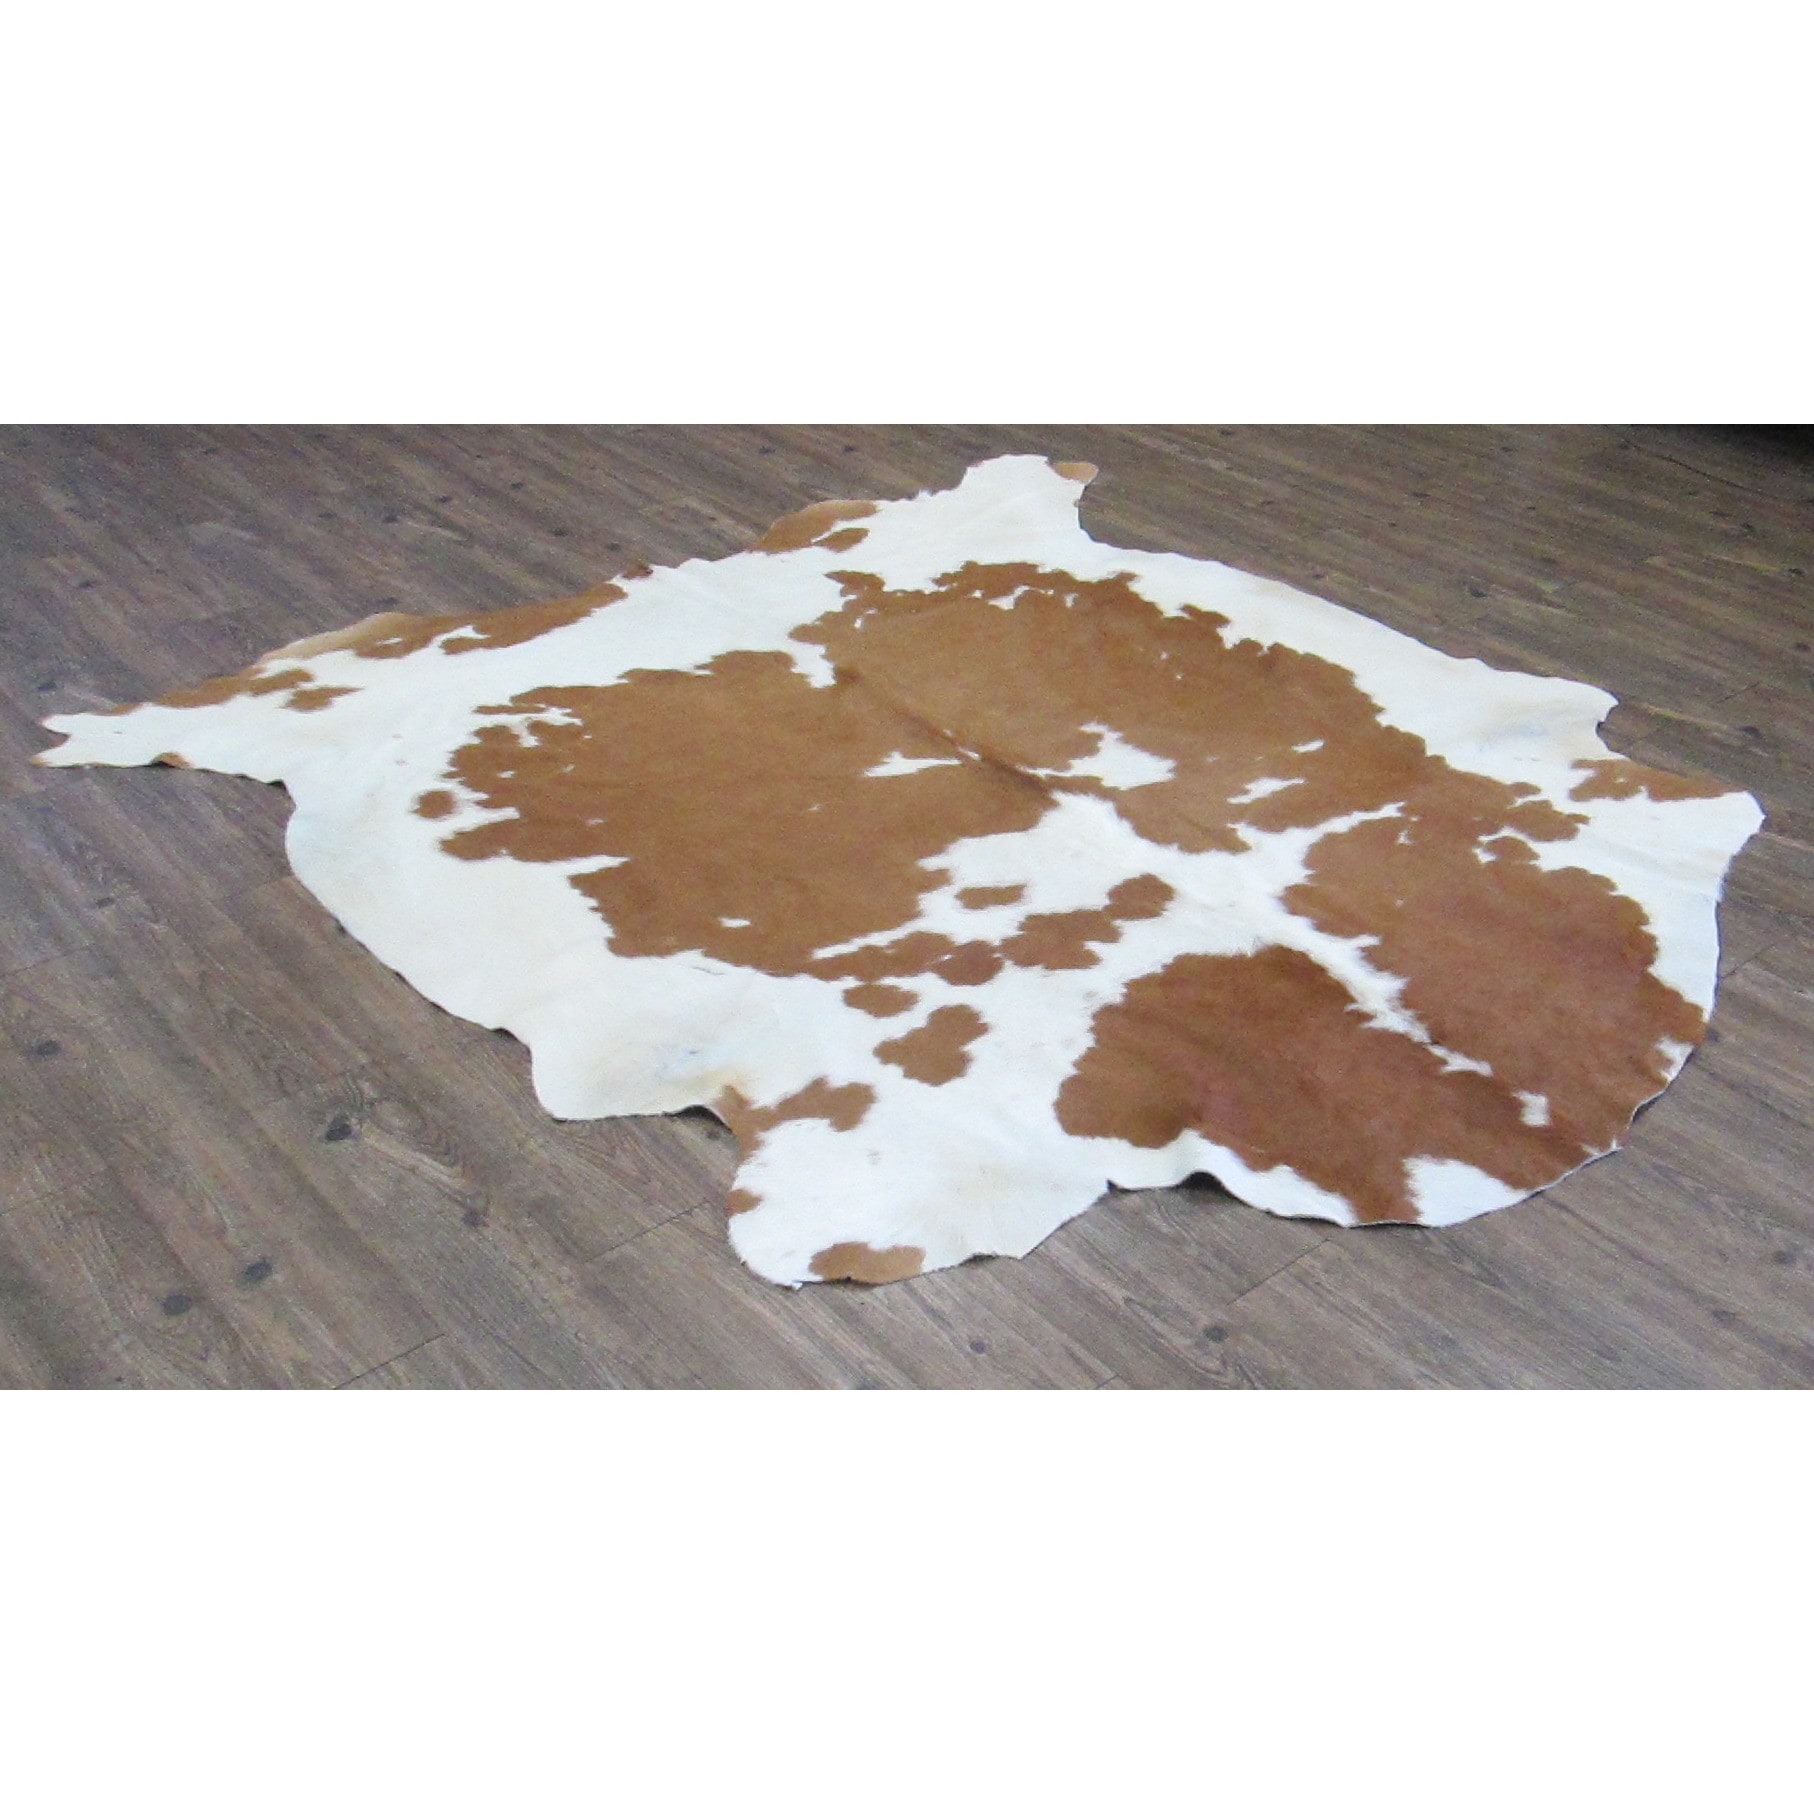 Home & Living Rugs Floor & Rugs As Picture Large Large Cowhide Rug Brown  White Cow Hide Skin Print Real Hair on Animal Area Rugs Western Decor 6 x 6  ft 